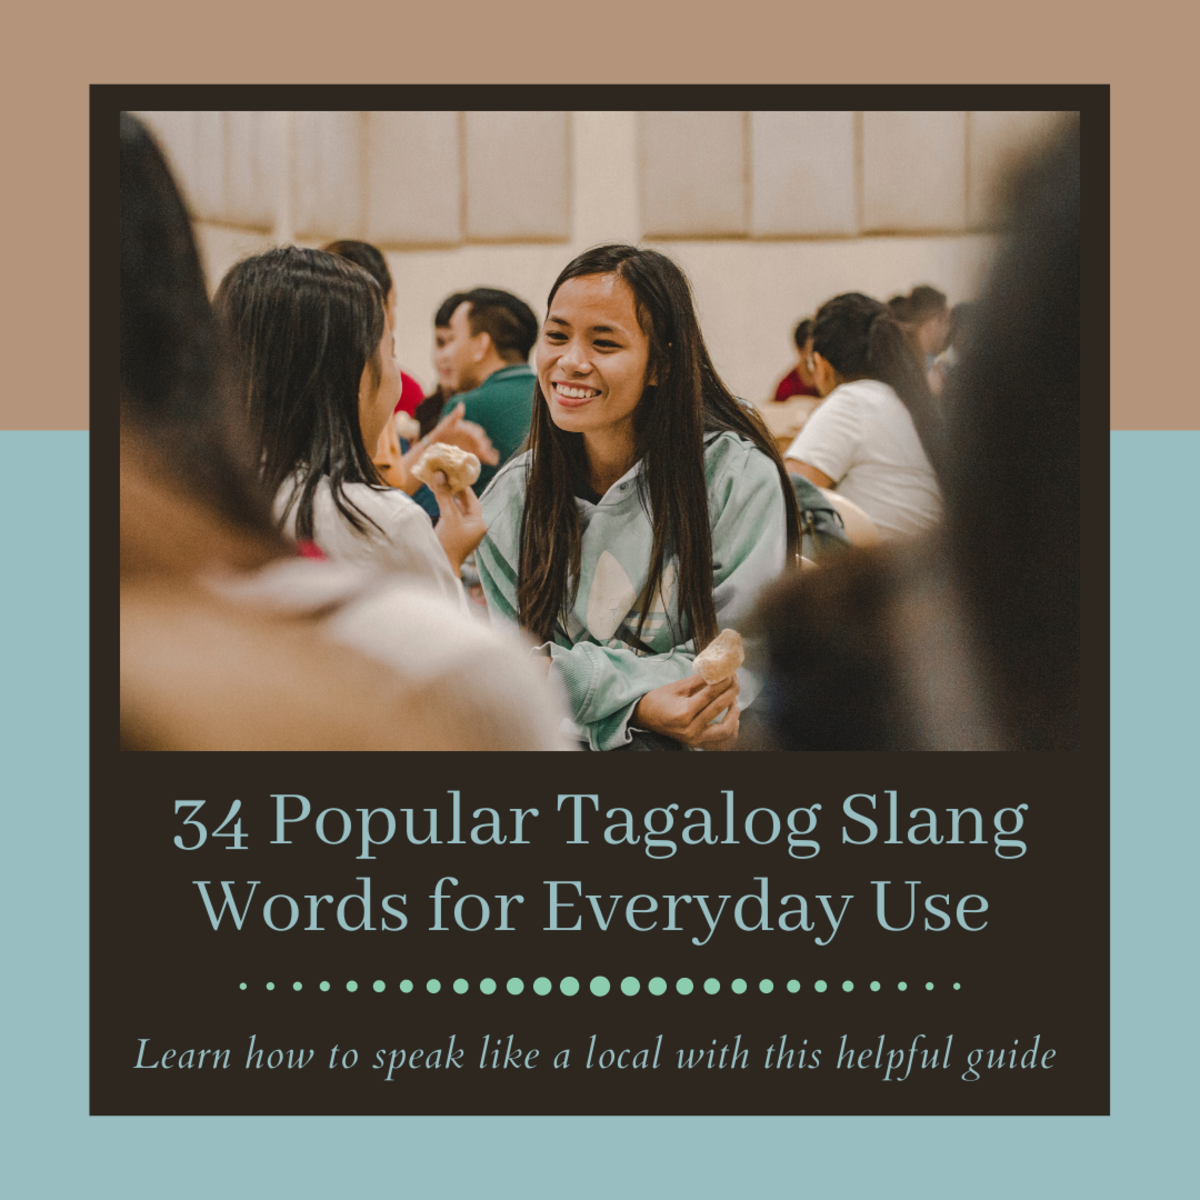 This guide will provide a long list of fun and useful Tagalog slang words for you to slip into everyday conversation to sound like a local.